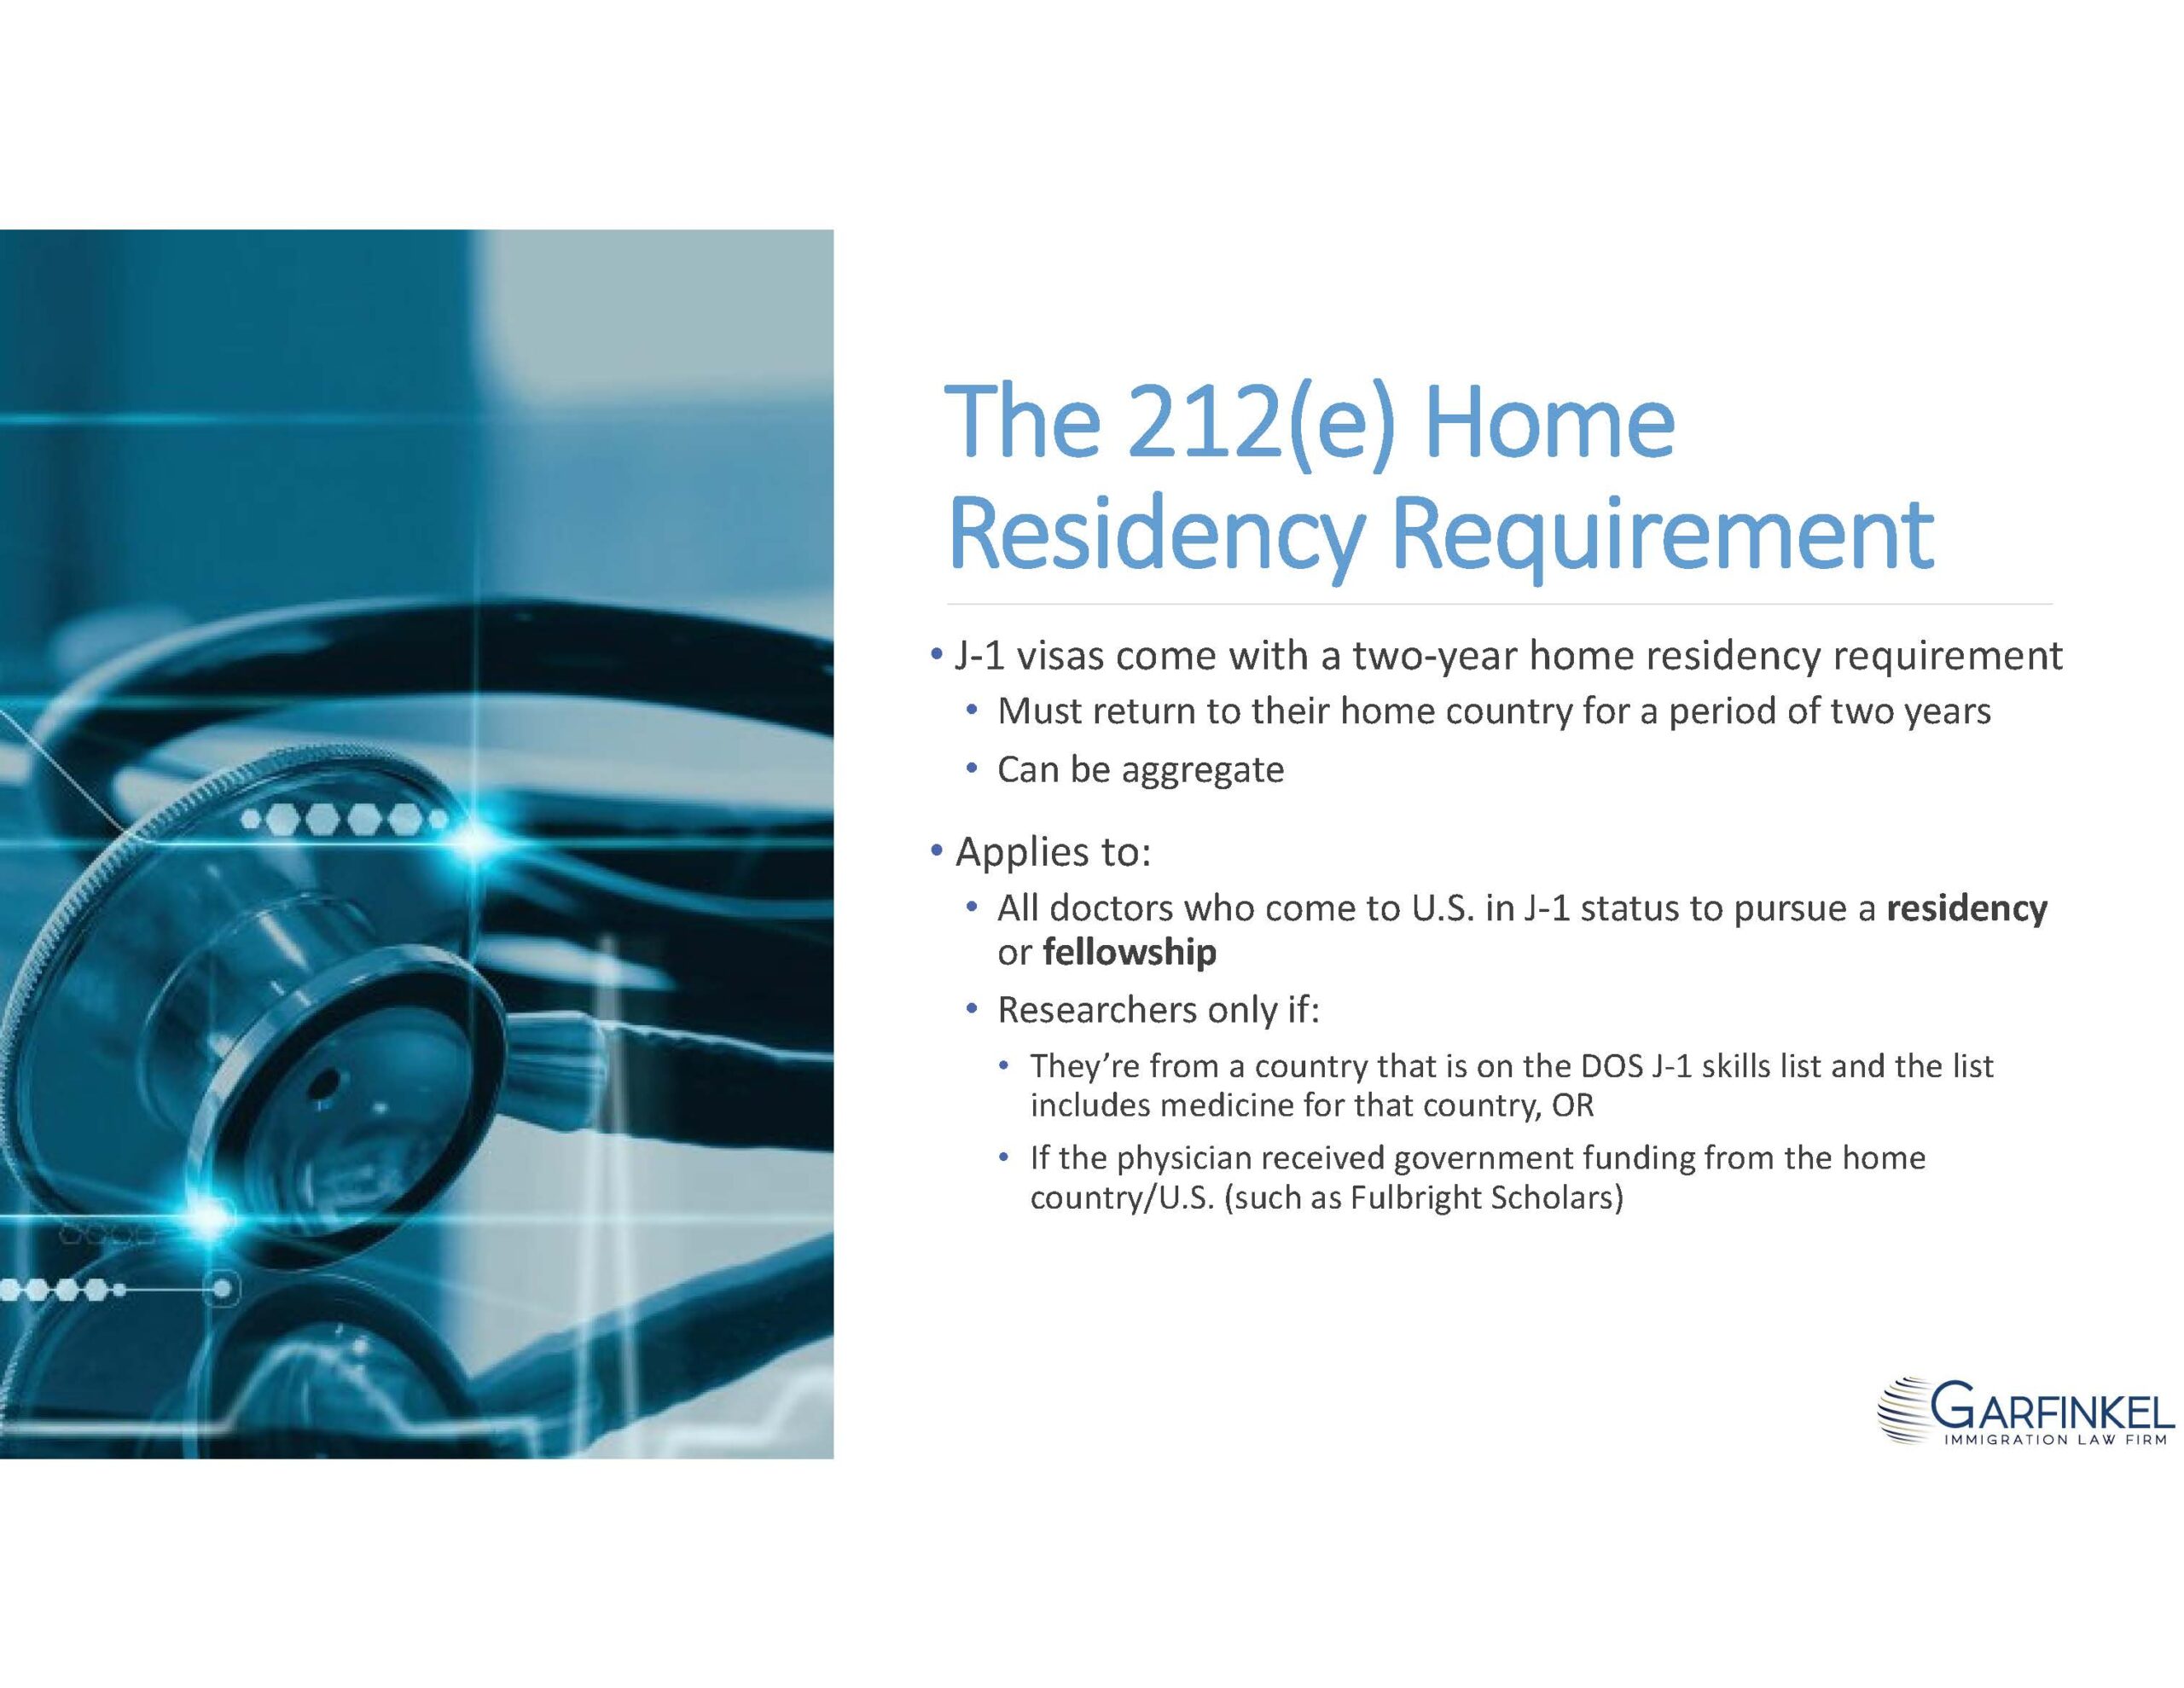 The 212(e) Home Residency Requirement.  J-1 visas come with a two-year home residency requirement. Must return to their home country for a period of two years. Can be aggregate. Applies to:
All doctors who come to U.S. in J-1 status to pursue a residency or fellowship; Researchers only if:
They’re from a country that is on the DOS J-1 skills list and the list includes medicine for that country, OR if the physician received government funding from the home country/U.S. (such as Fulbright Scholars).